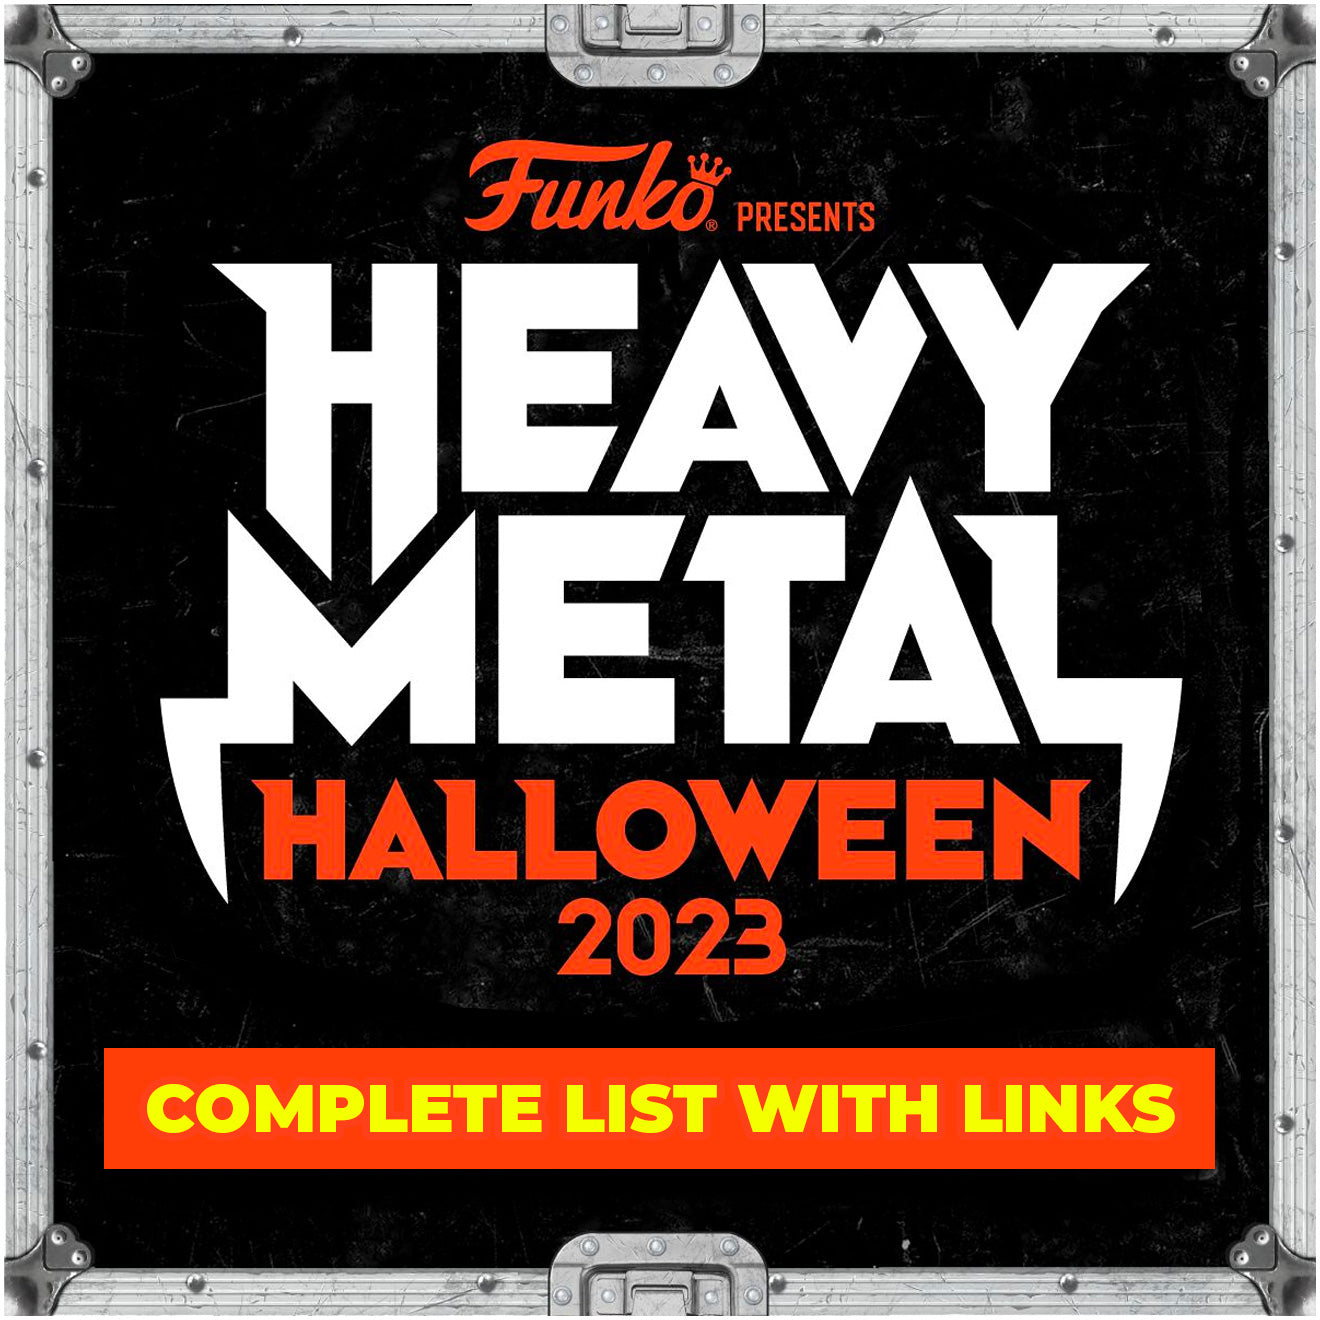 NYCC 2023 Funko Heavy Metal Halloween Complete List with Links